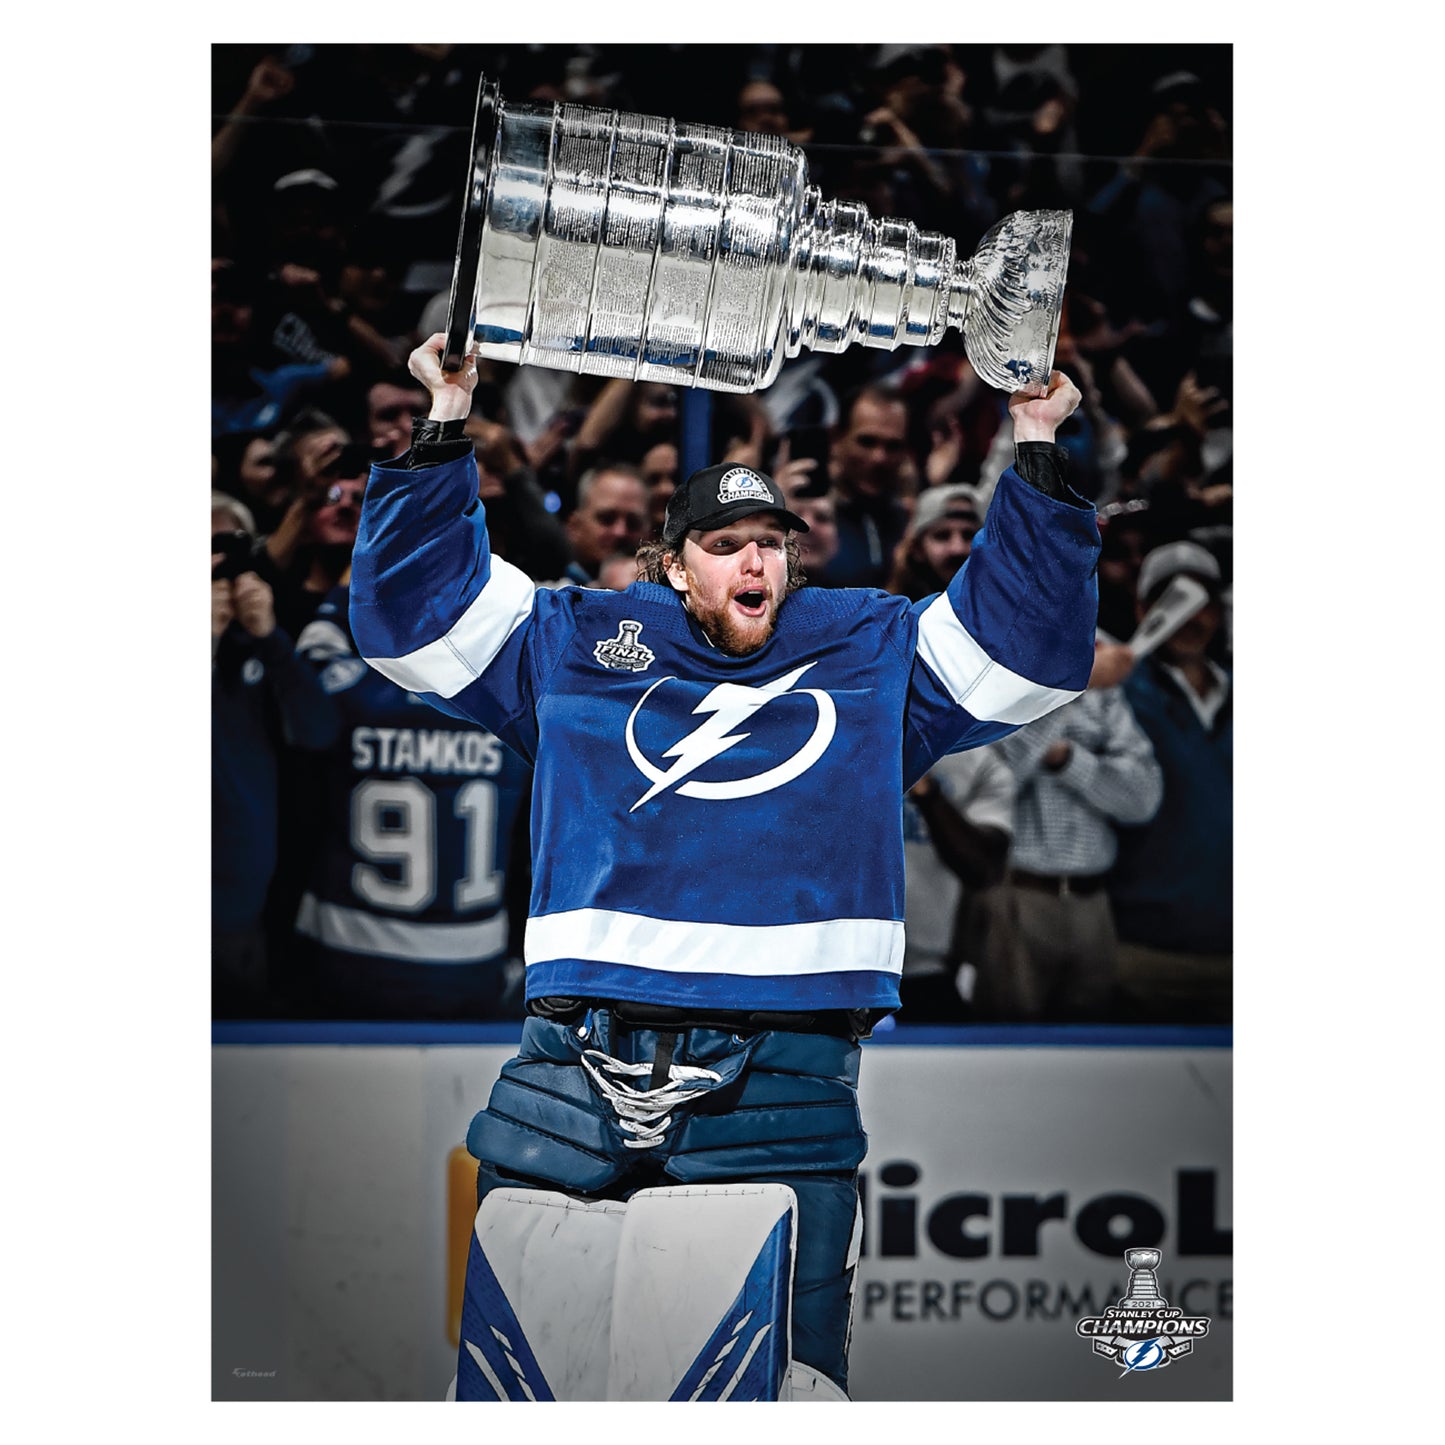 Tampa Bay Lightning: Stanley Championship Banner - NHL Removable Wall Adhesive Wall Decal Giant Cup 43W x 42H